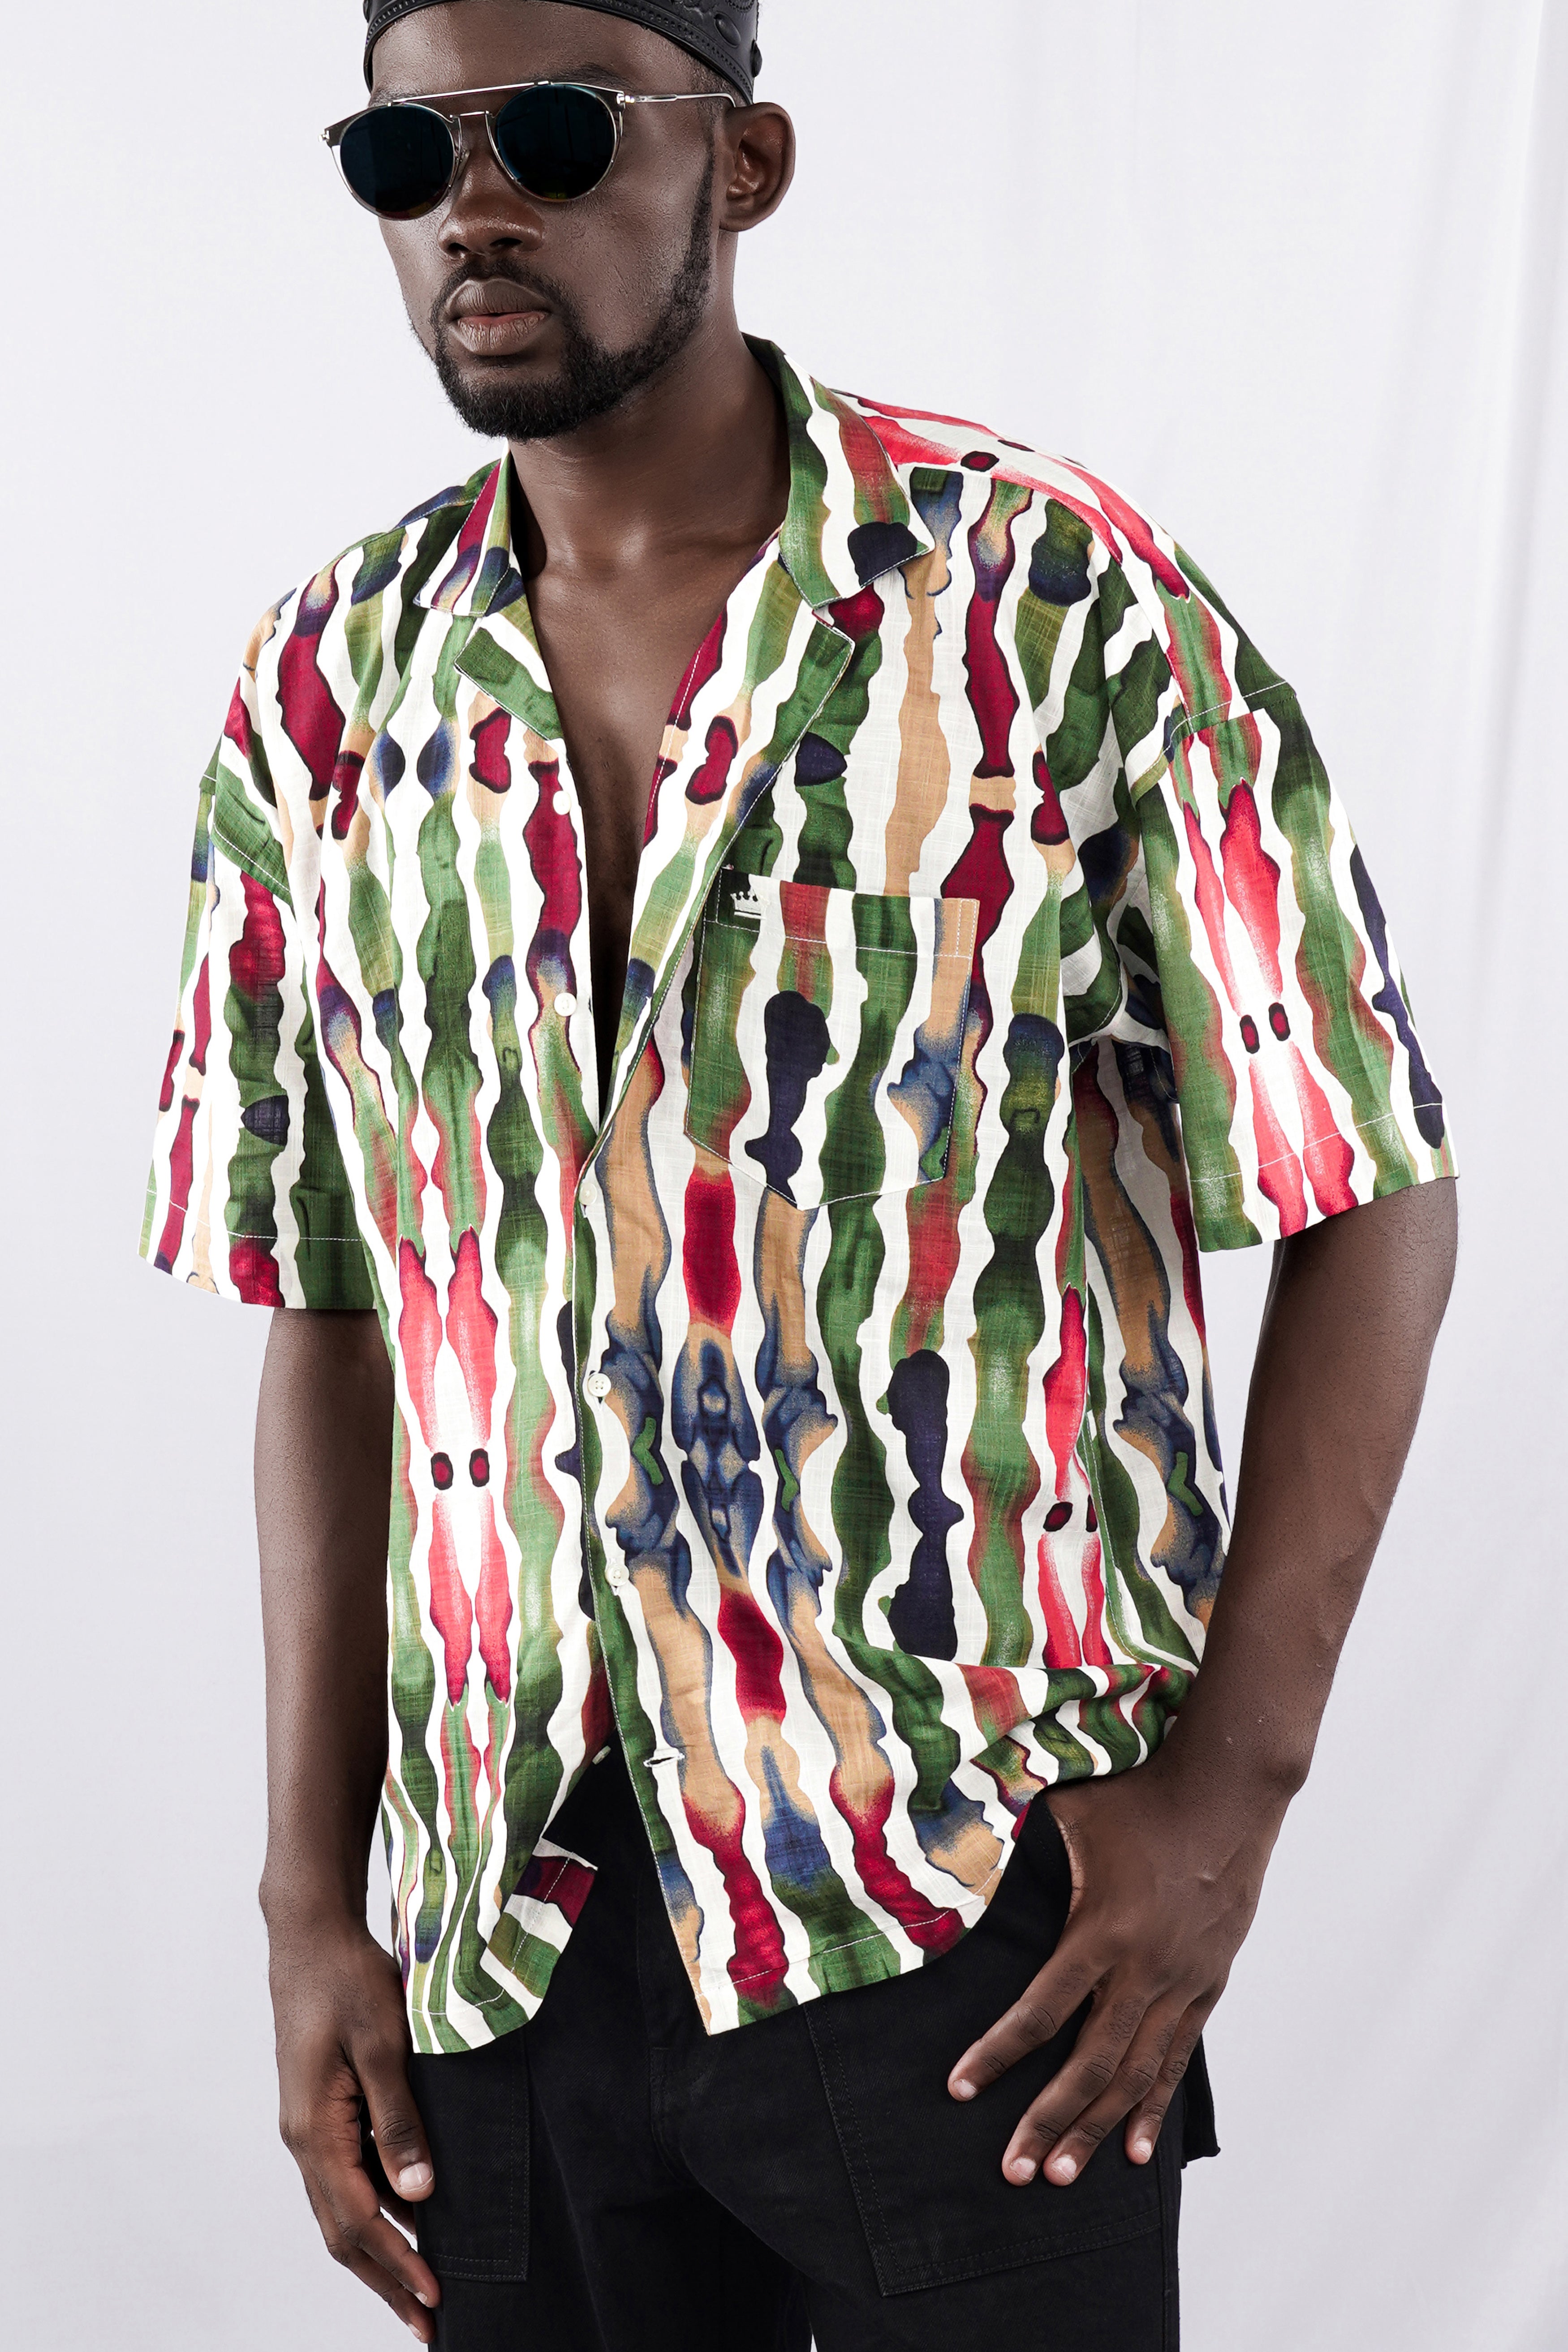 Asparagus Green with Bright White Funky Printed Lightweight Premium Cotton Oversized Shirt